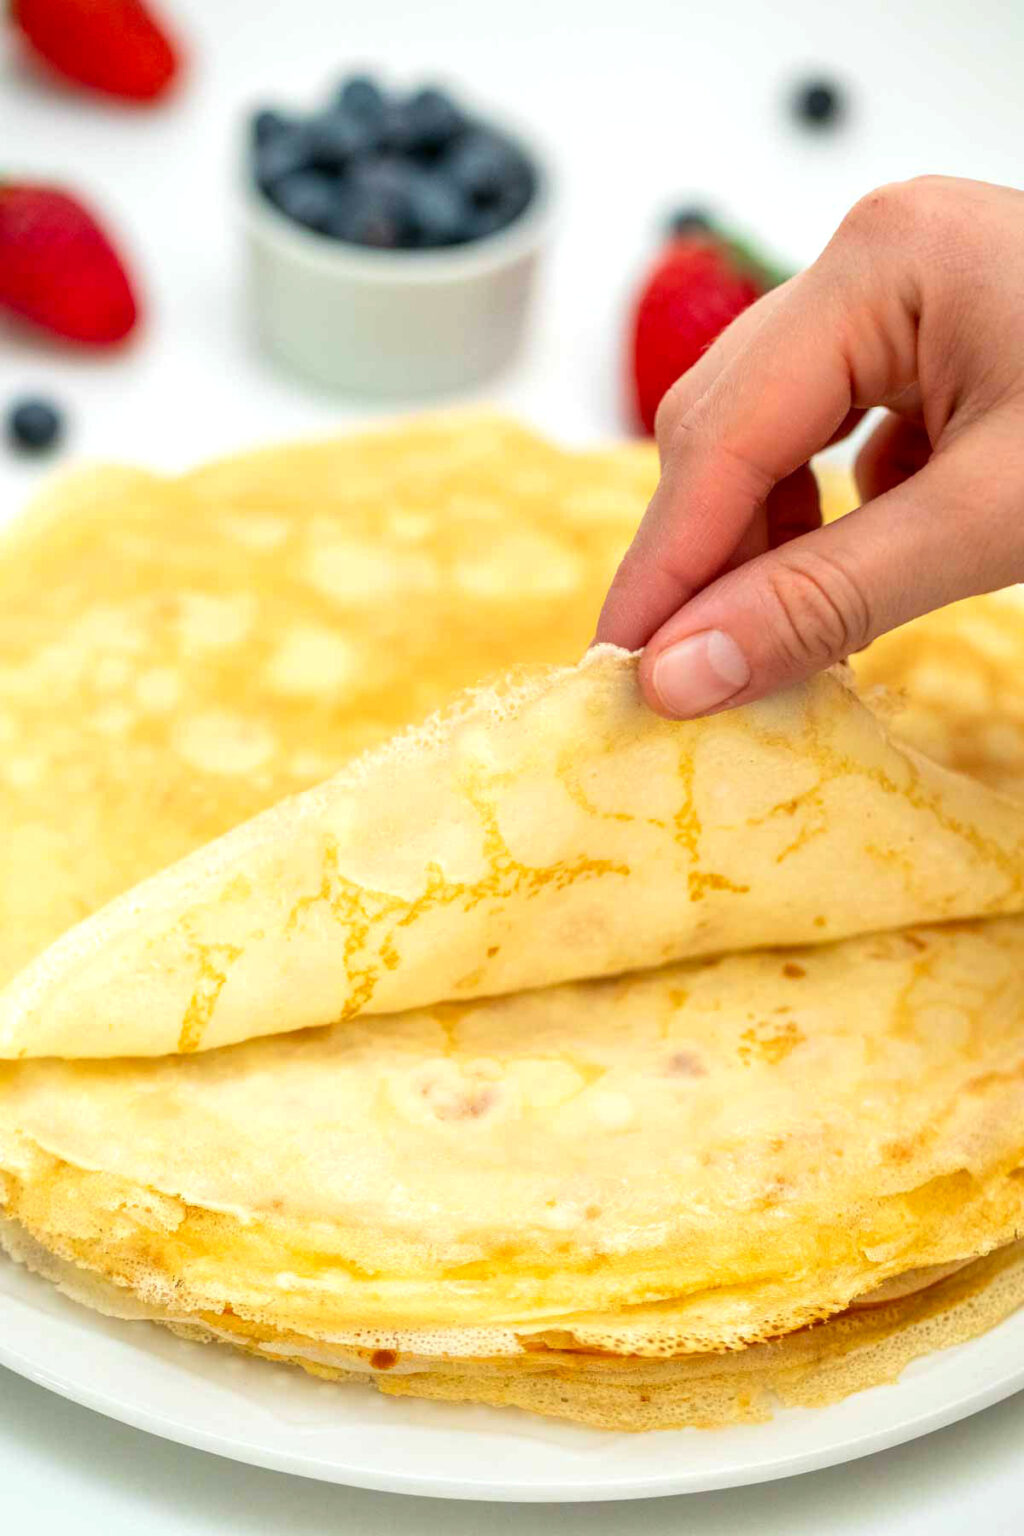 French Crepes Recipe [Video] - Sweet and Savory Meals